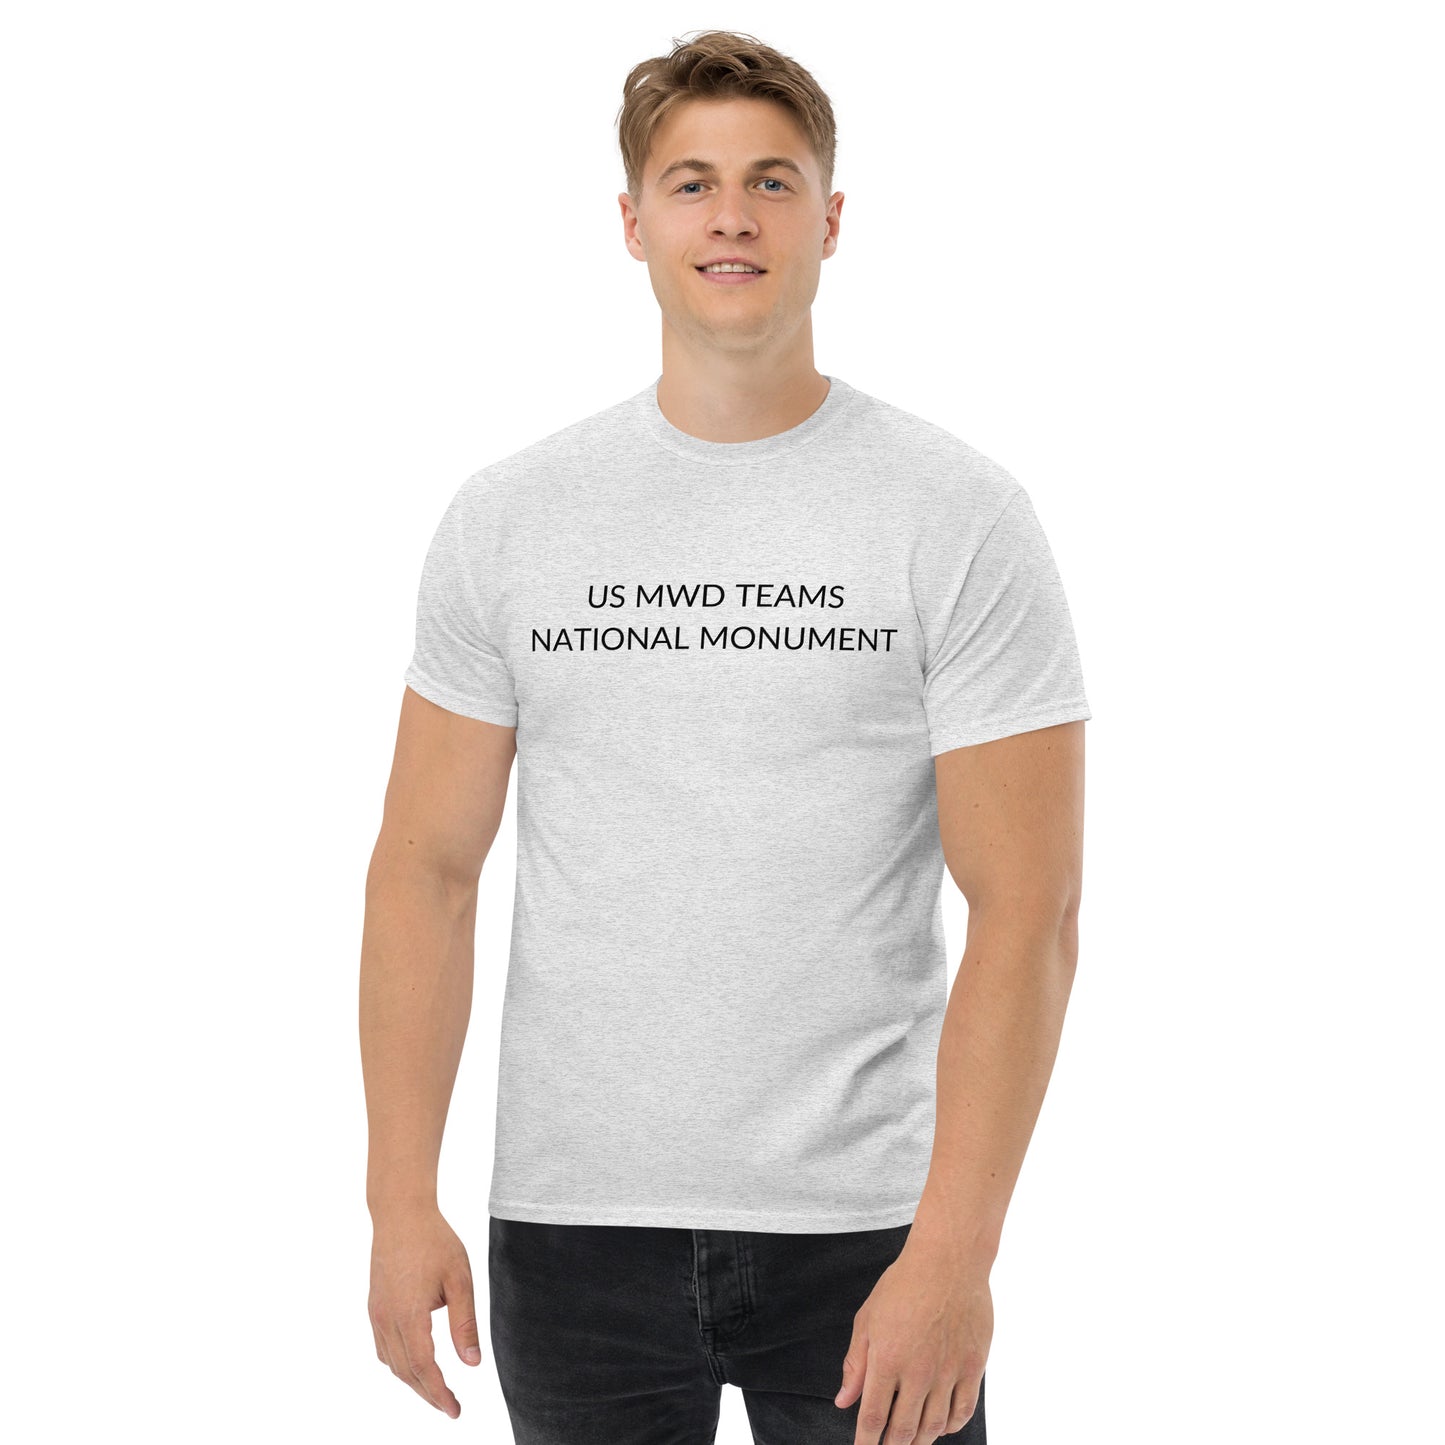 MWDT National Monument Tee